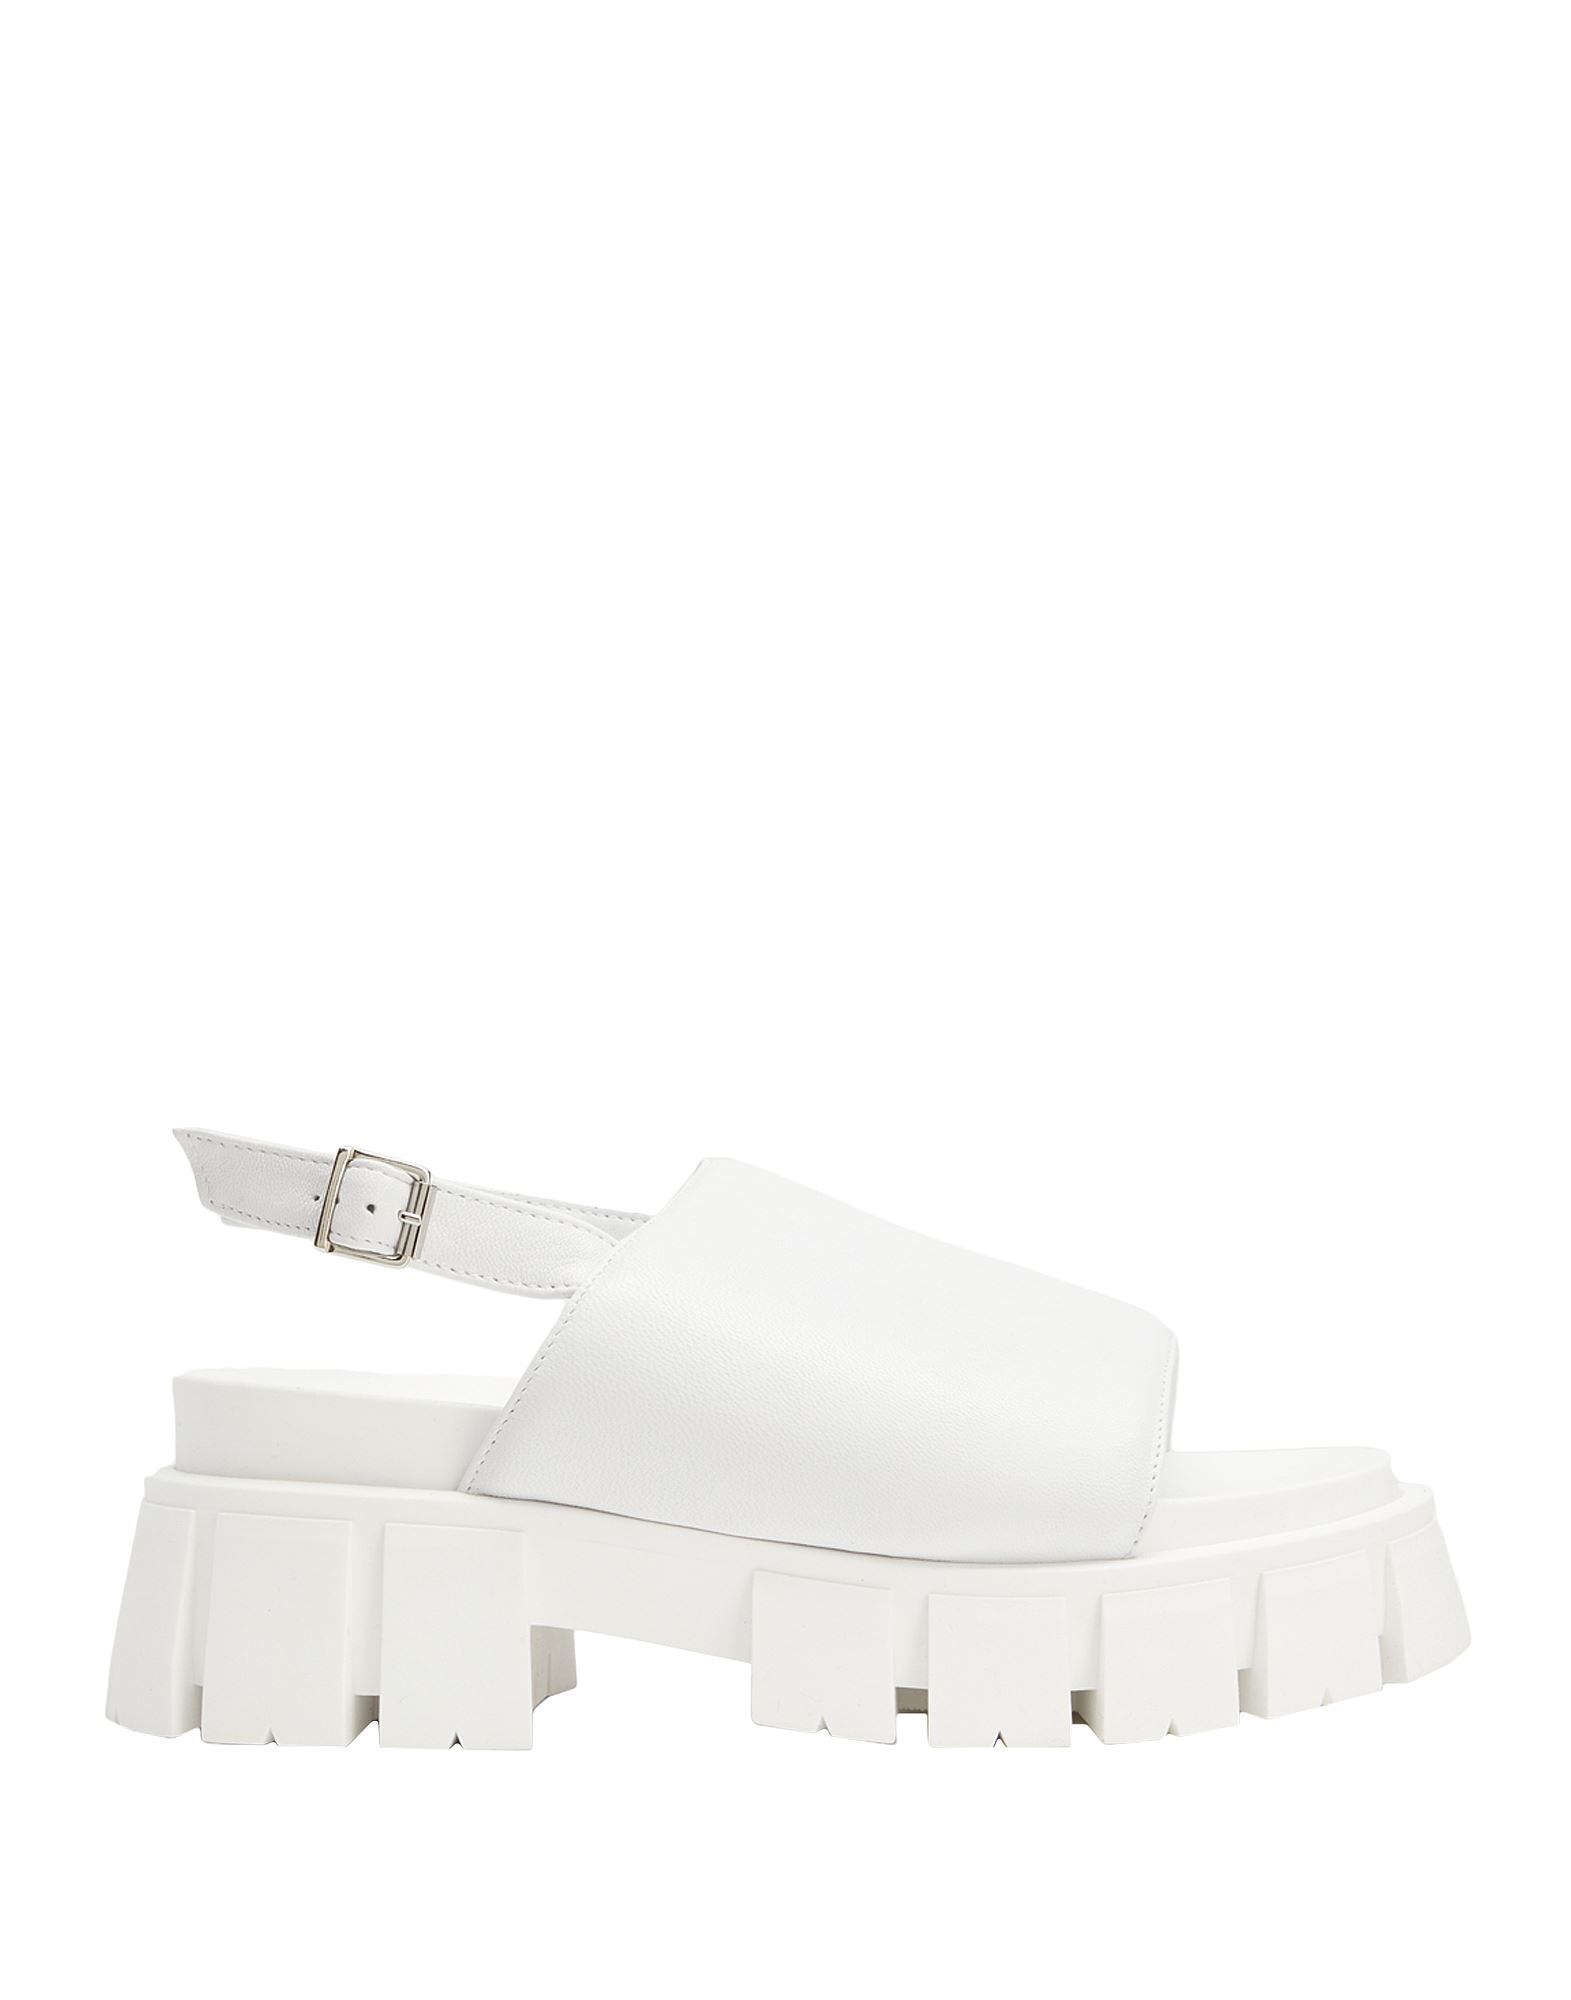 8 By Yoox Sandals In White